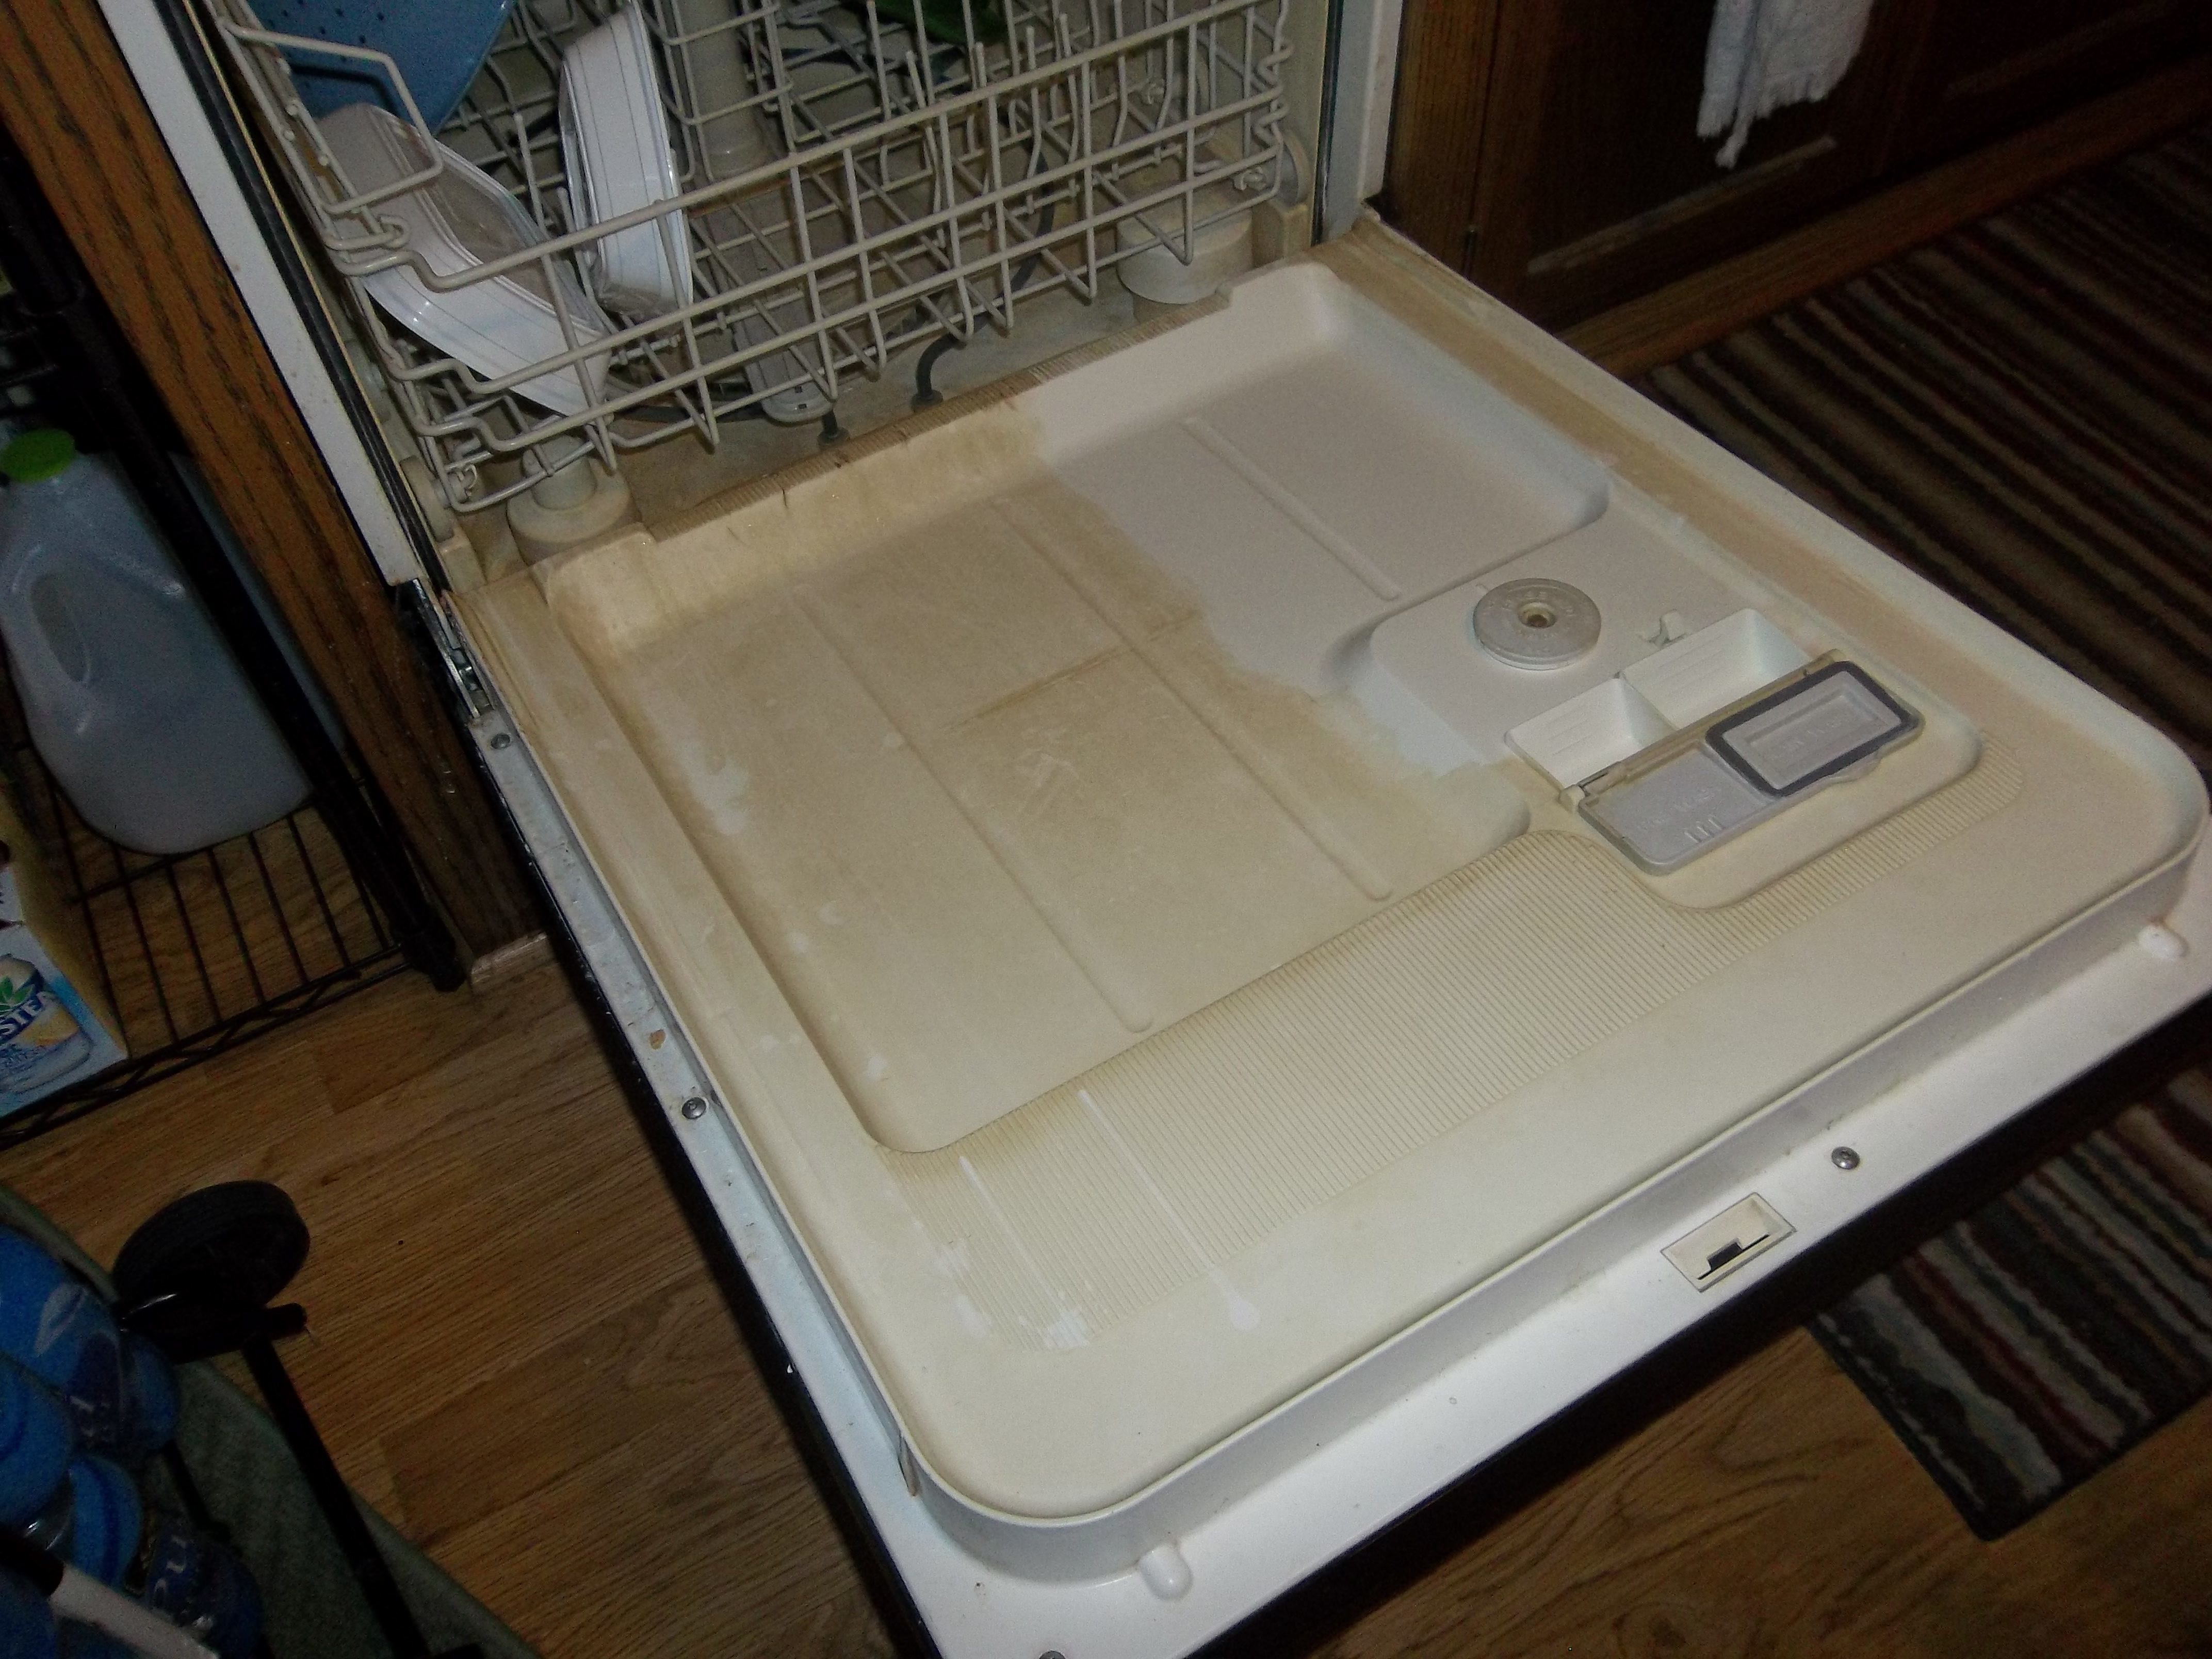 Top 131 Complaints and Reviews about Finish Dishwasher Detergent Page 2